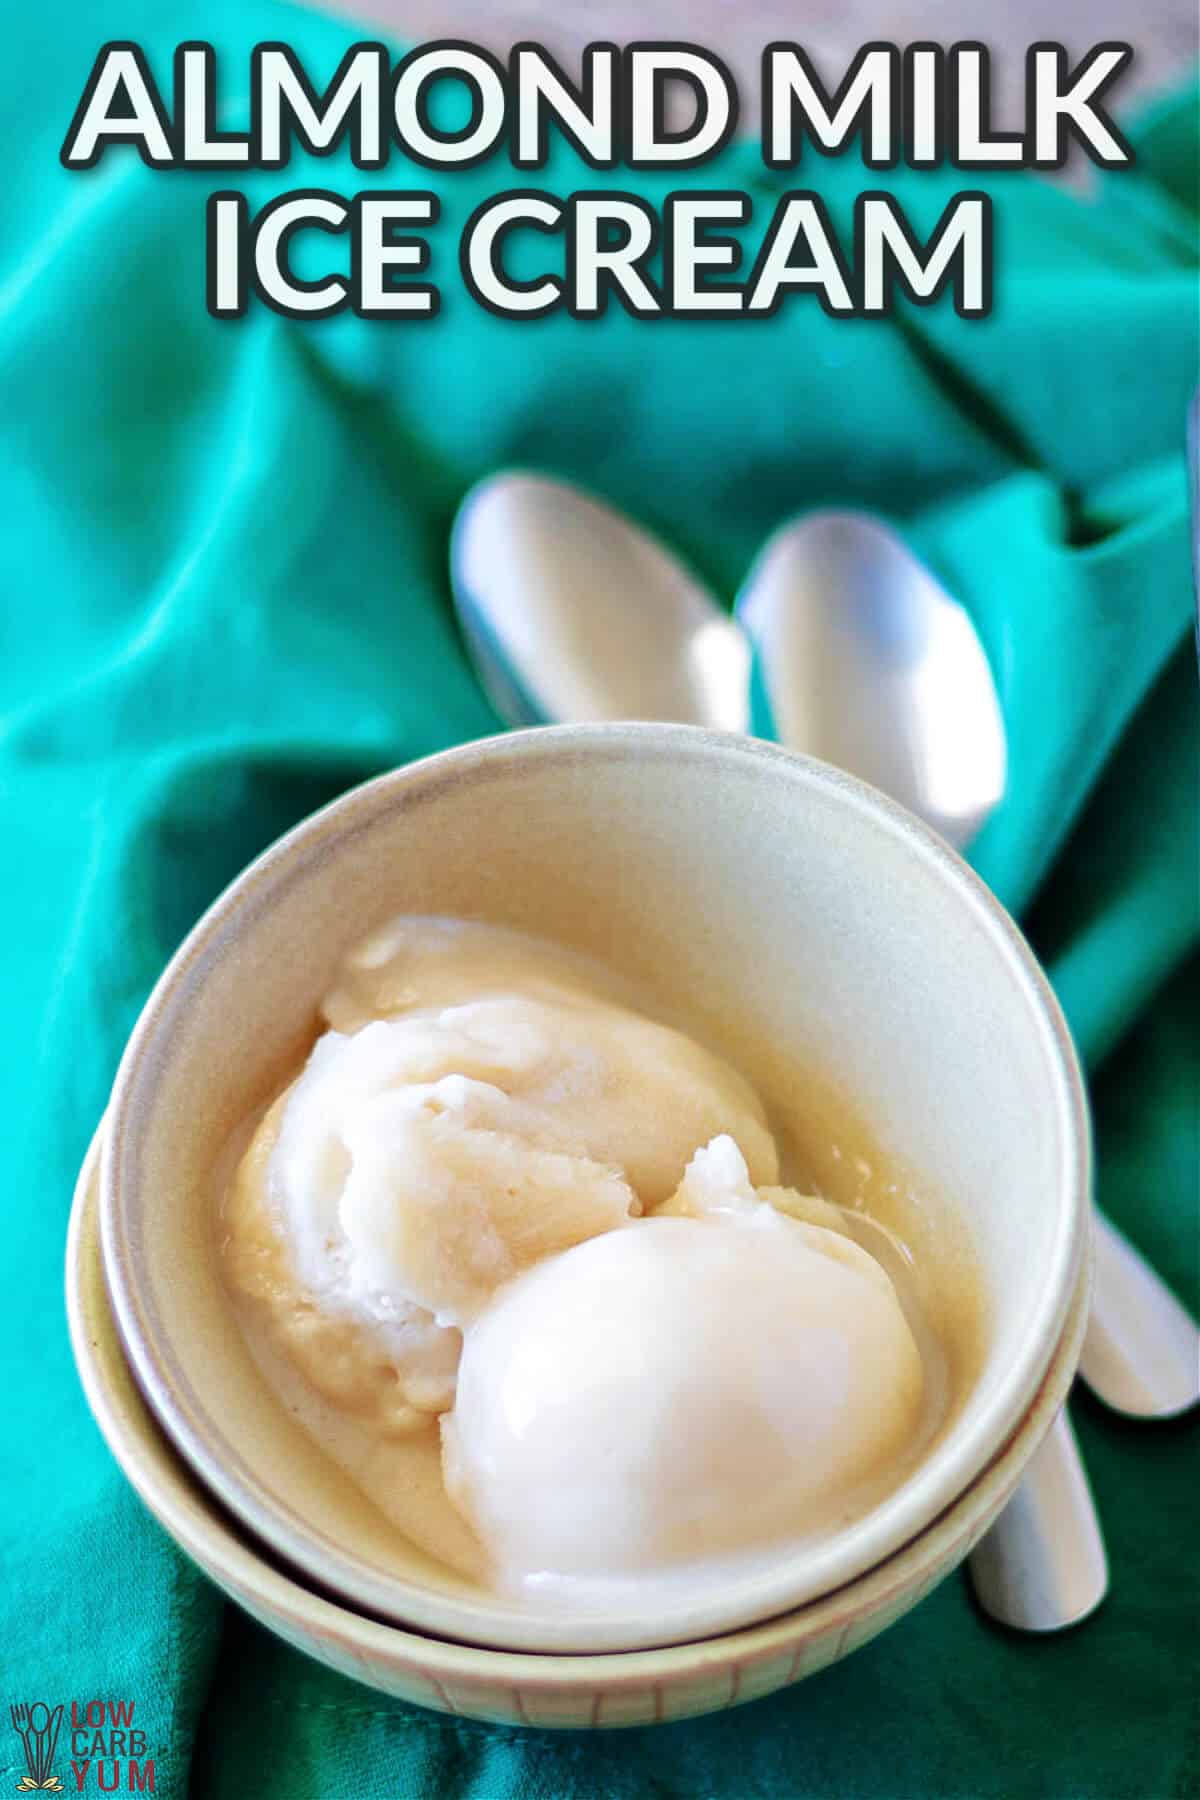 two scoops almond milk ice cream in bowl with text overlay